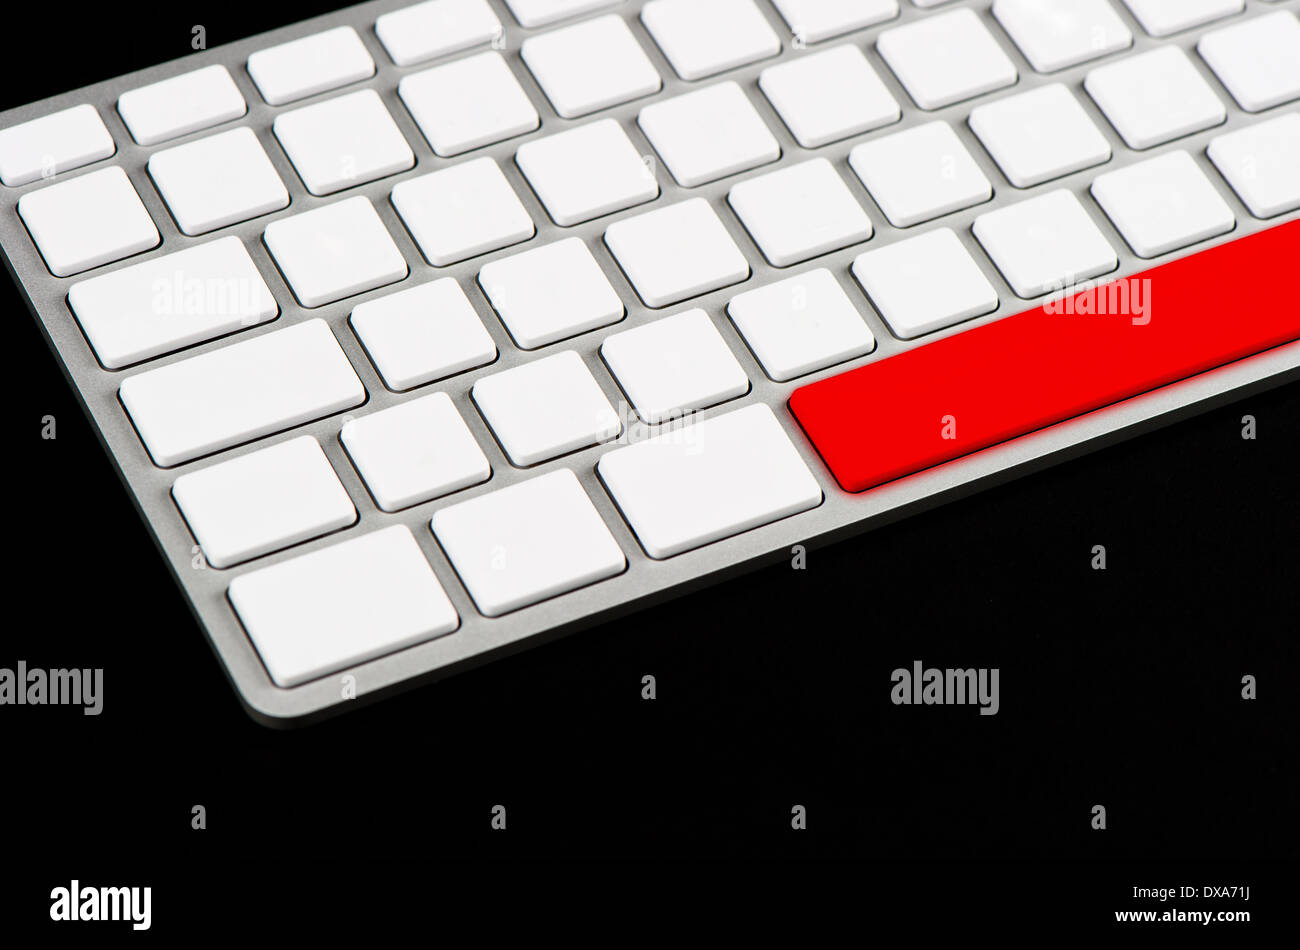 white blank keyboard with red button on black background Stock Photo